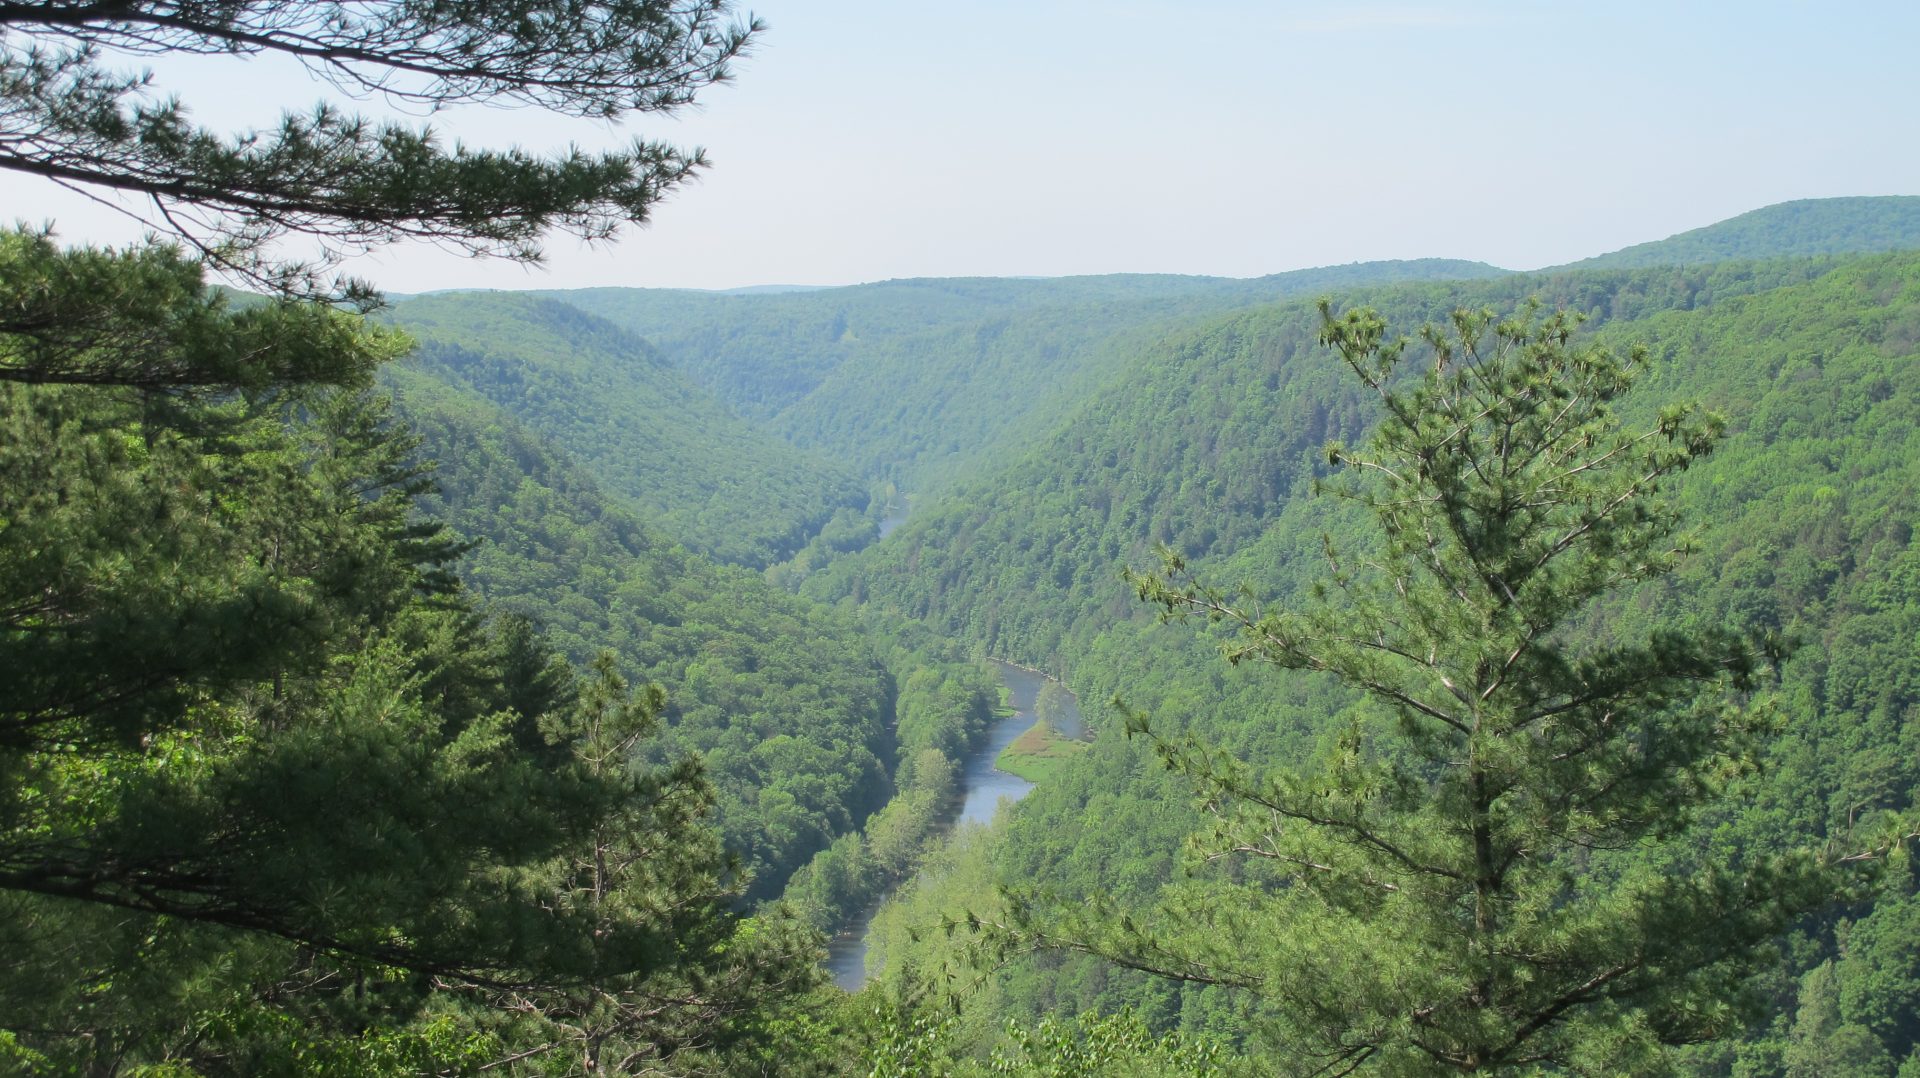 The Pine Creek Gorge in Tioga County.